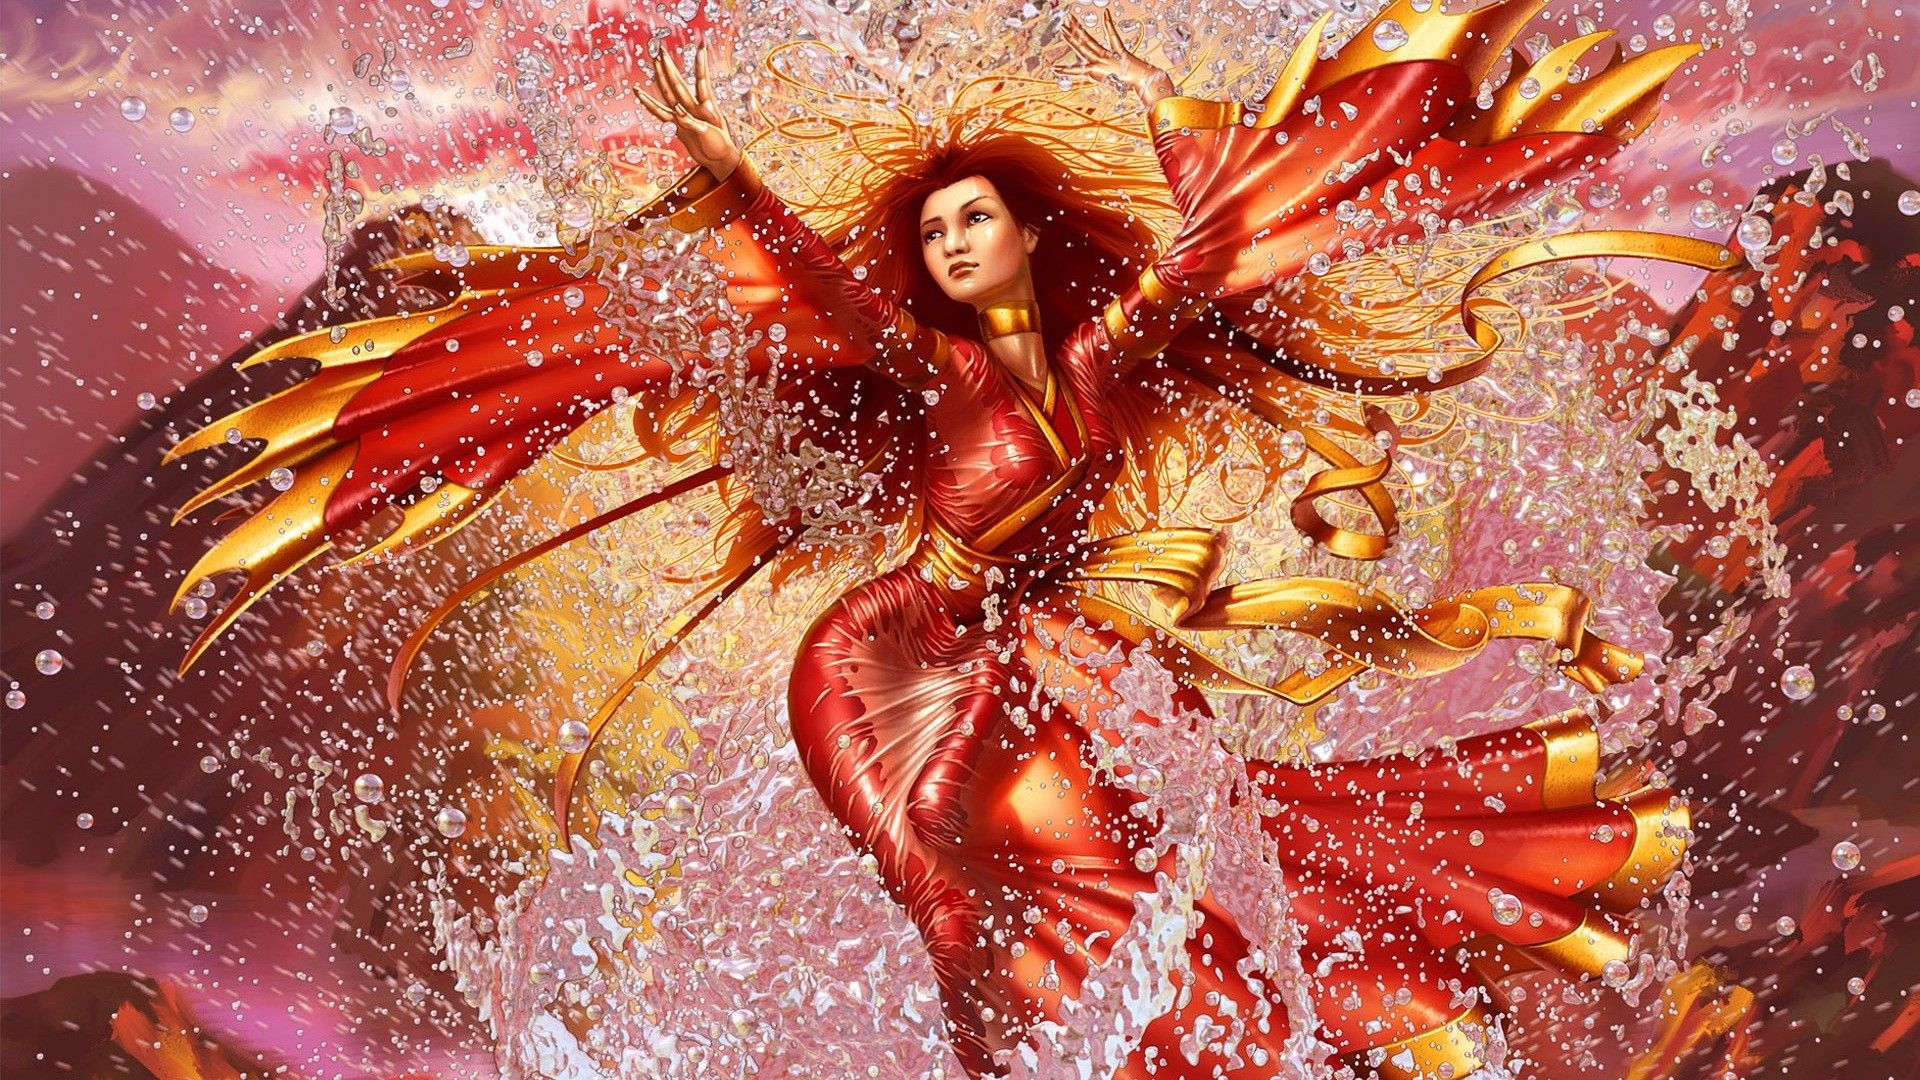 The girl in the red dress and splashing water wallpaper